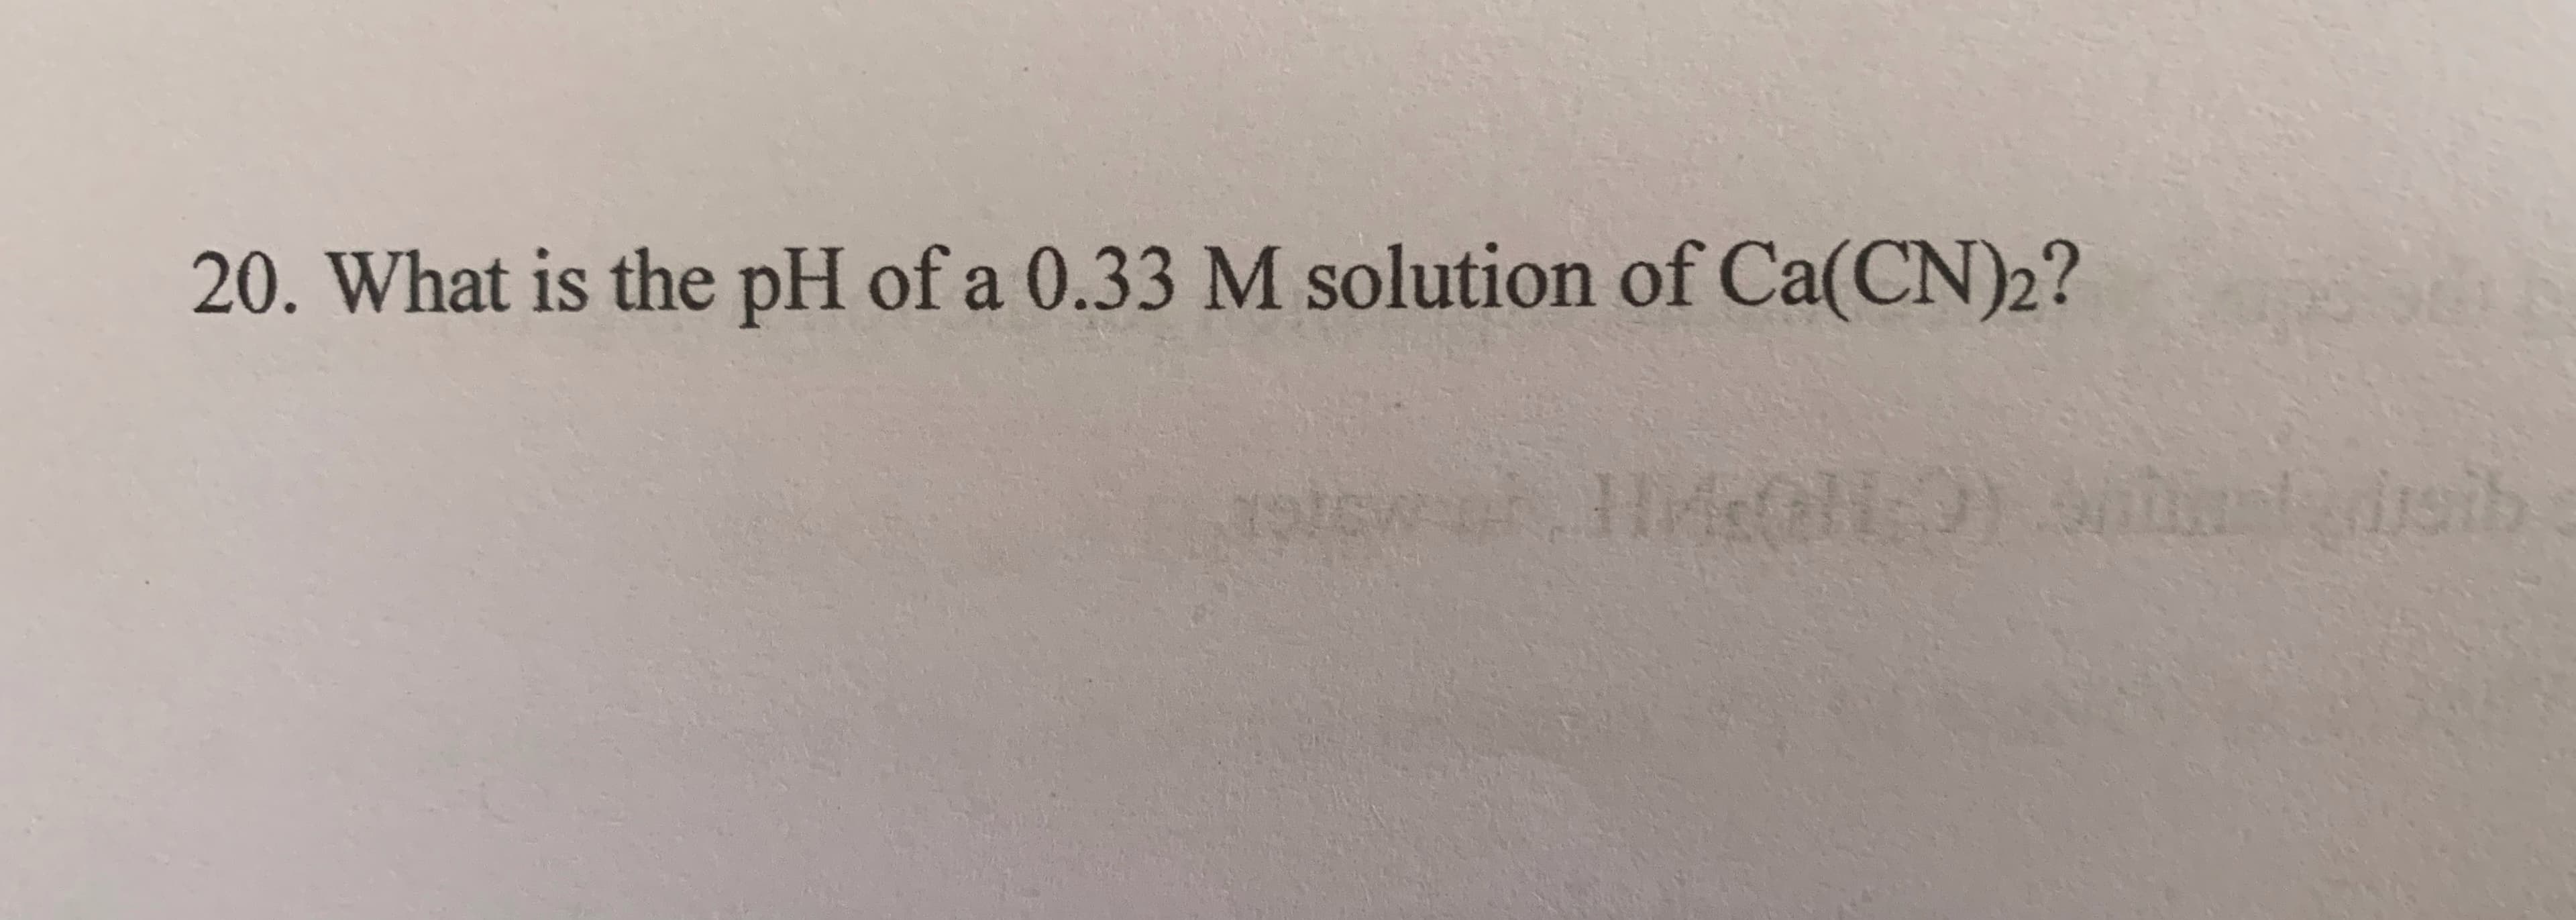 20. What is the pH of a 0.33 M solution of Ca(CN)2?
